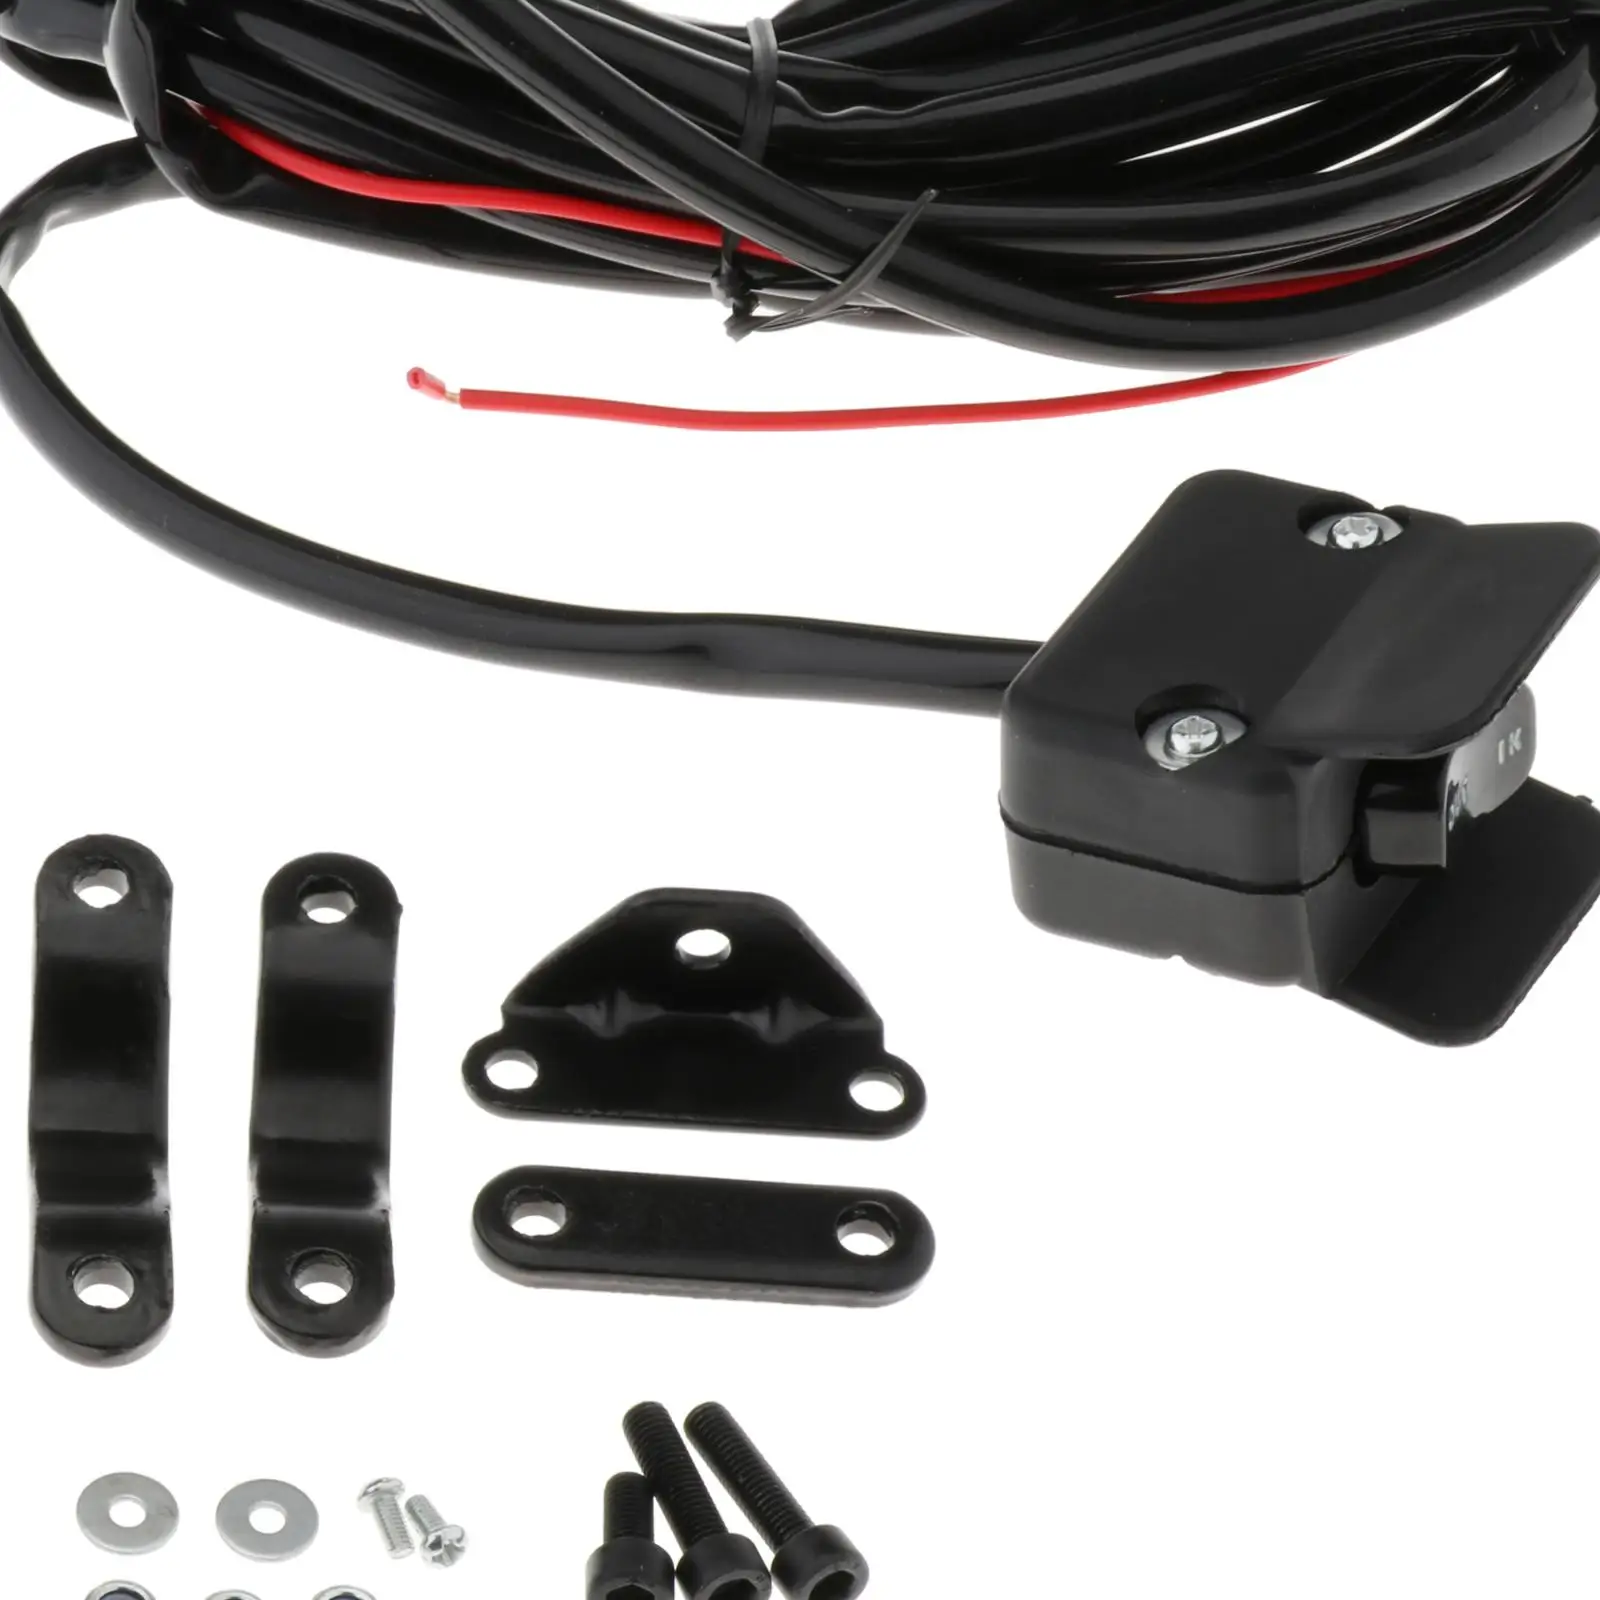 12V Winch Rocker Thumb Switch with Mounting Bracket Kit Replacement for ATV UTV